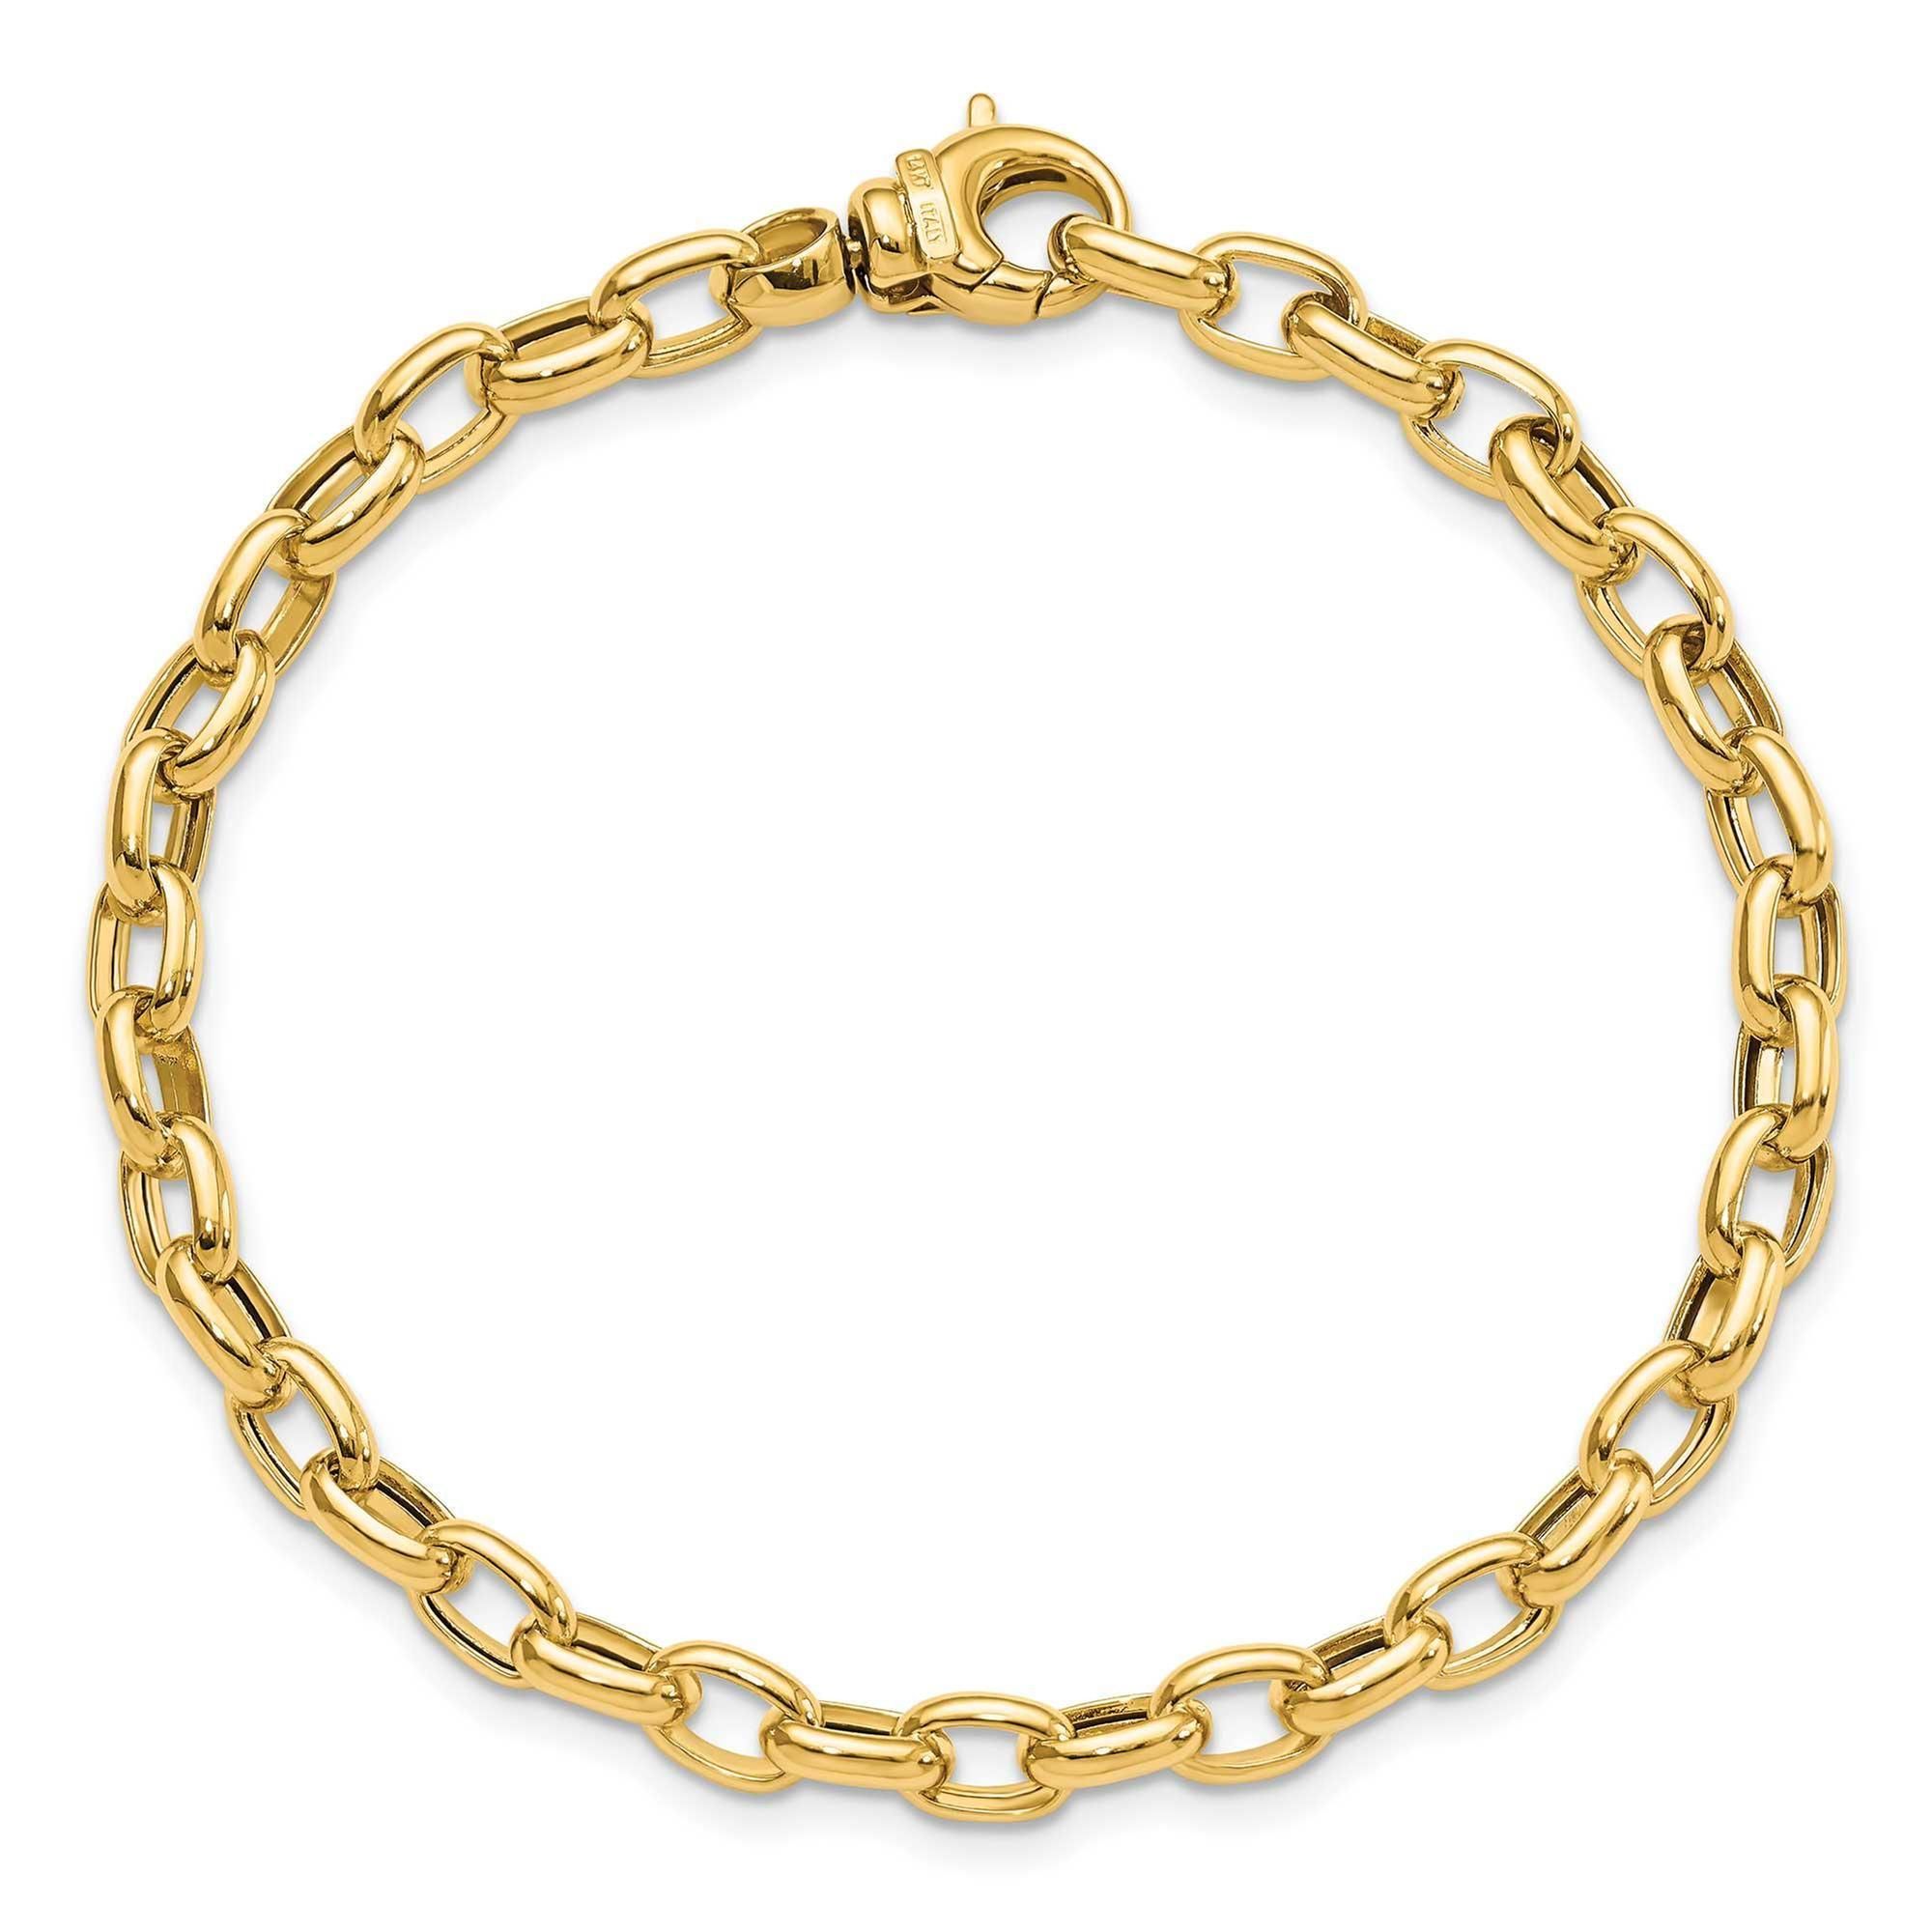 14K Gold Trio Diamond Bracelet with Thin Chain 14K Gold / 6.5 Inches